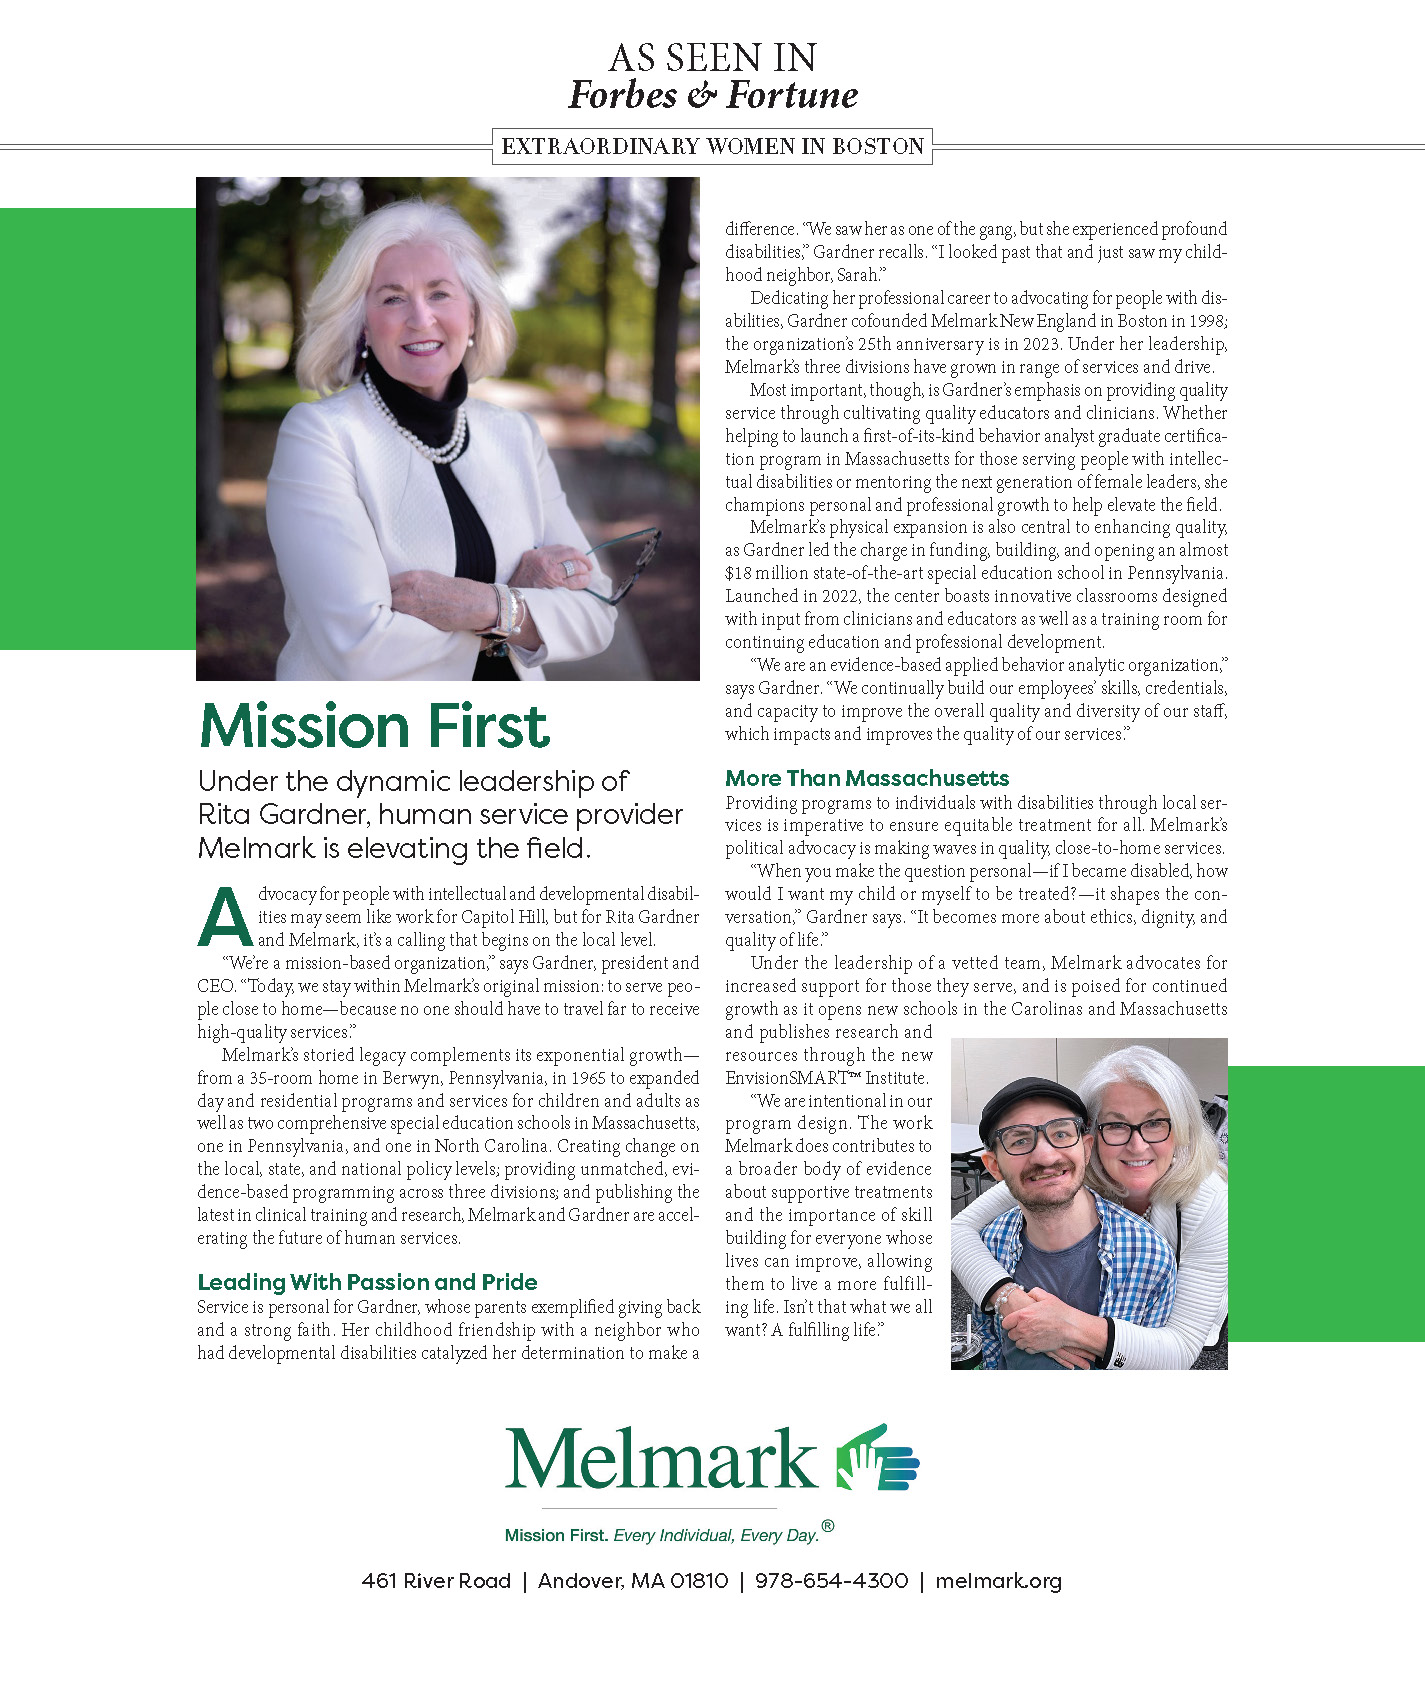 Rita M. Gardner, President and CEO of Melmark, featured in Forbes and Fortune Magazine (June 2023)